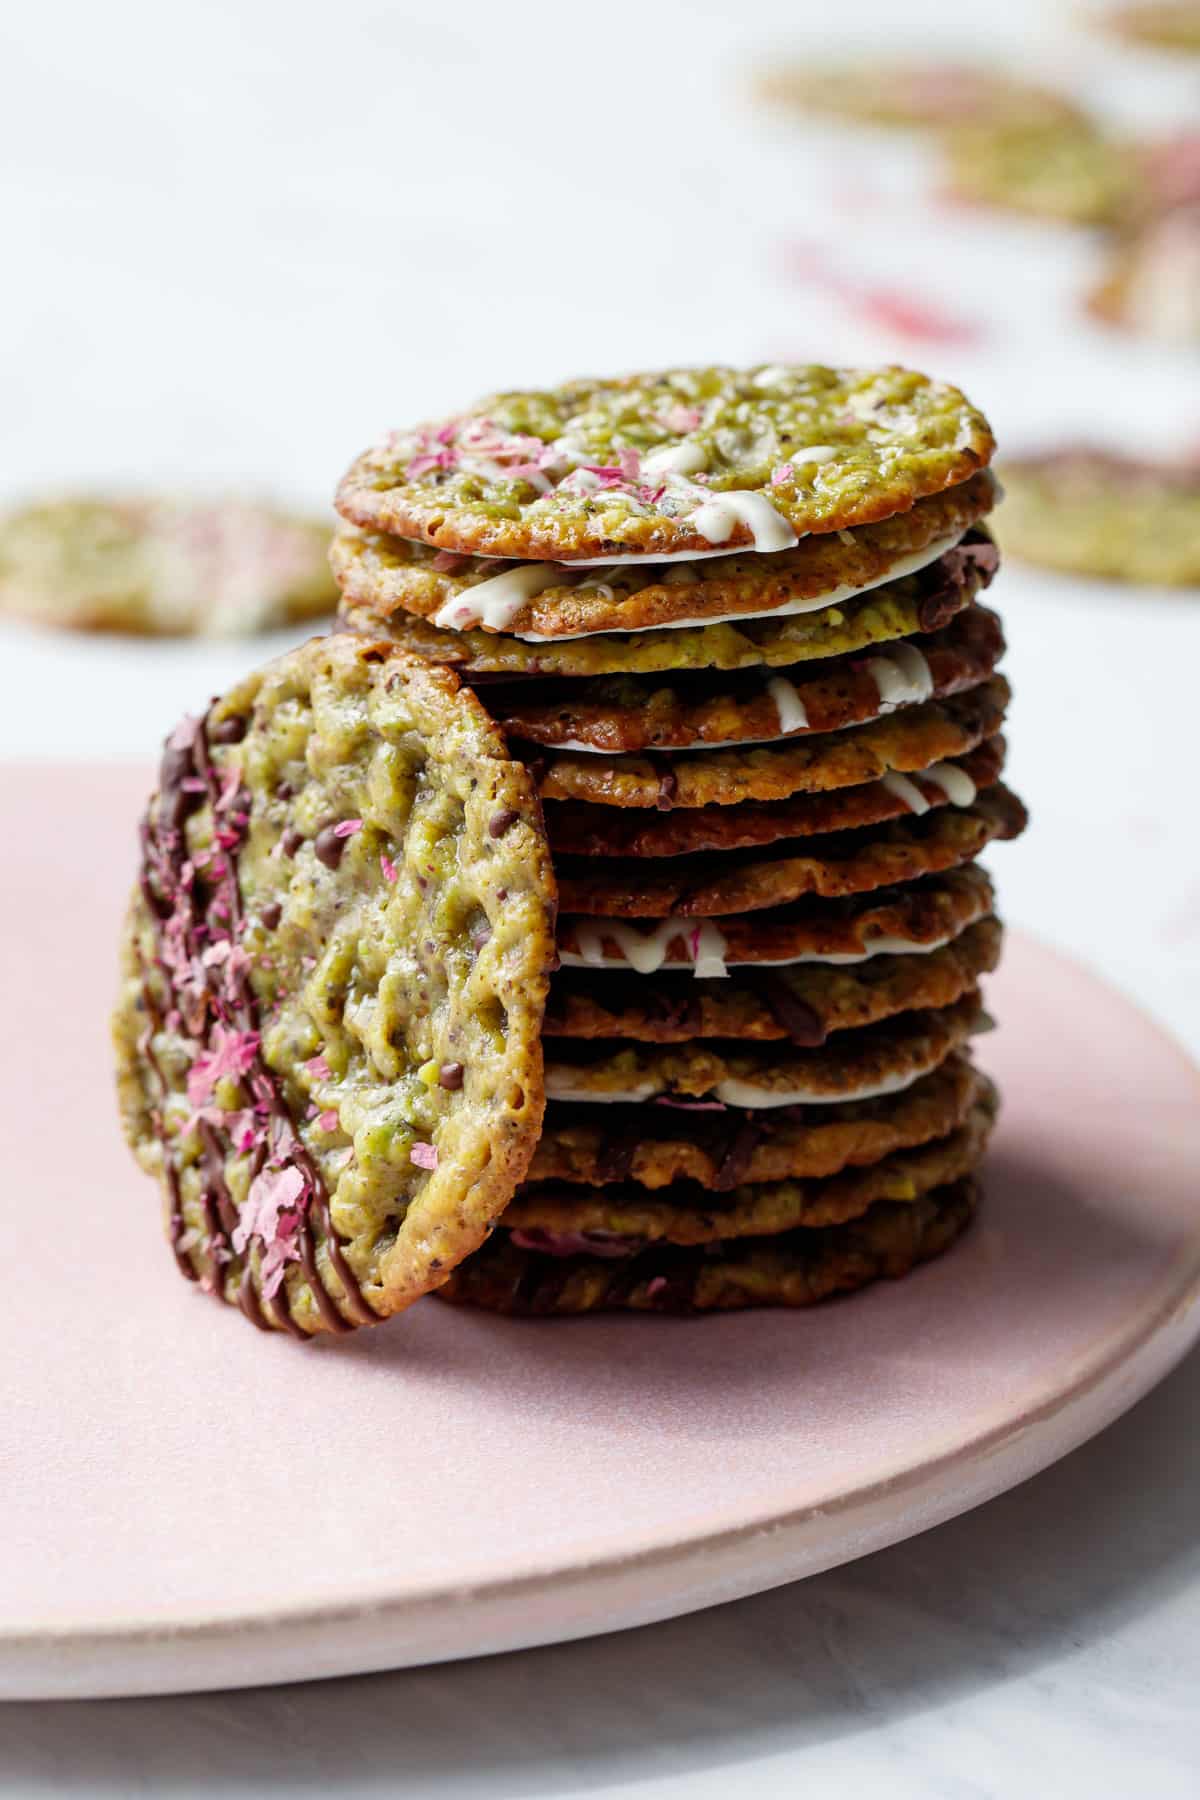 Tall stack of Pistachio Florentine Cookies on a pink plate, one cookie leaning up against the side to show the chocolate drizzle and rose petals on top.